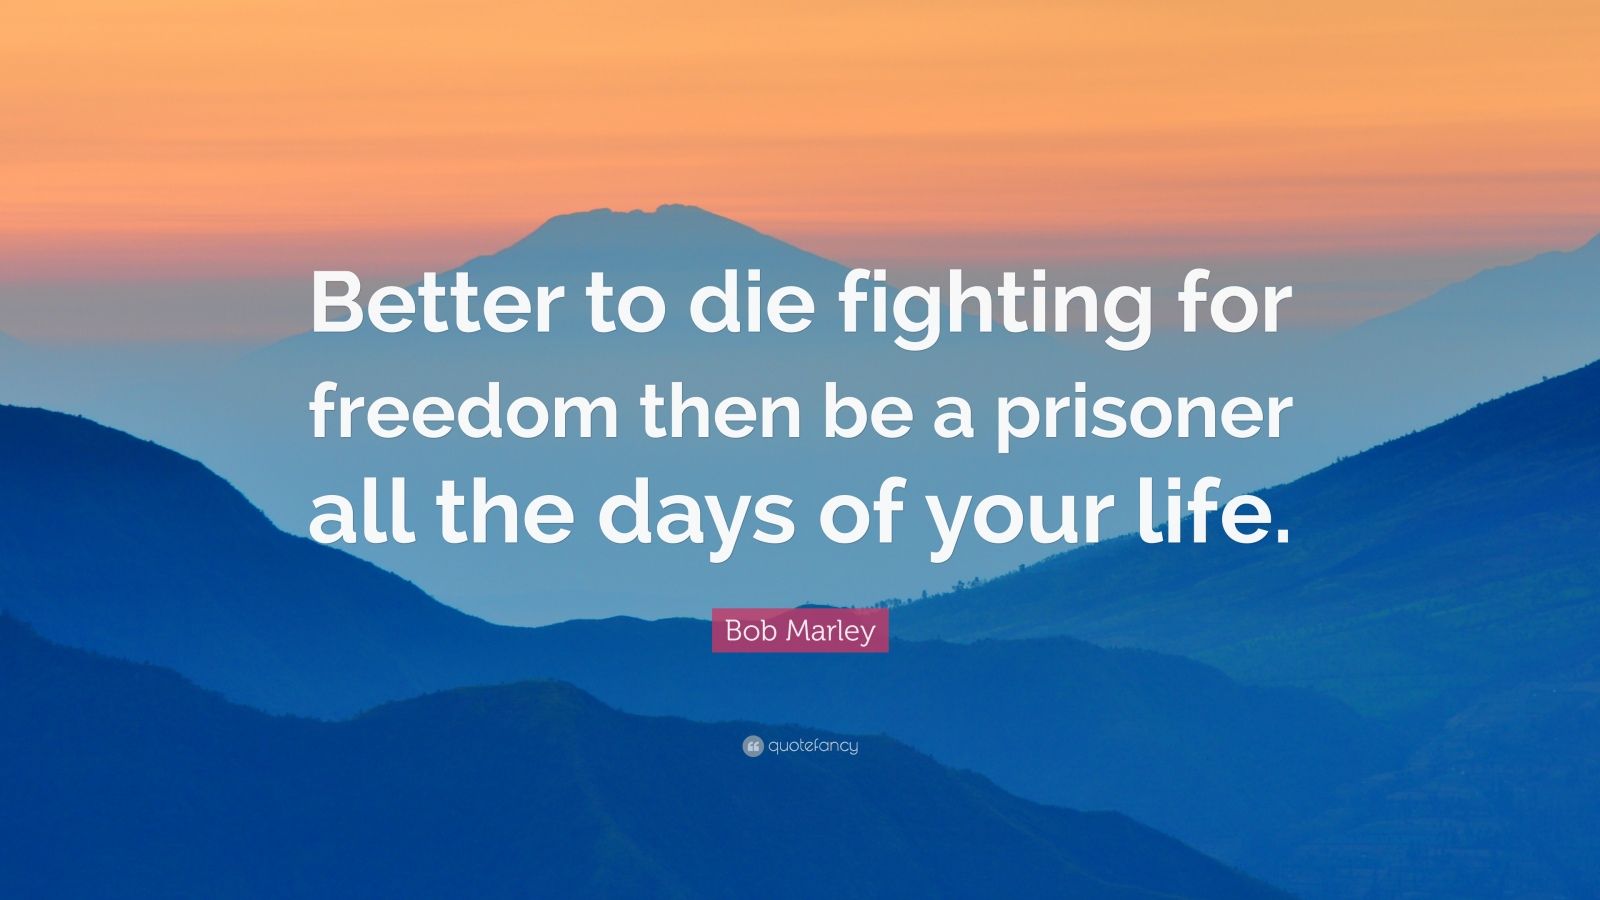 Bob Marley Quote “Better to fighting for freedom then be a prisoner all